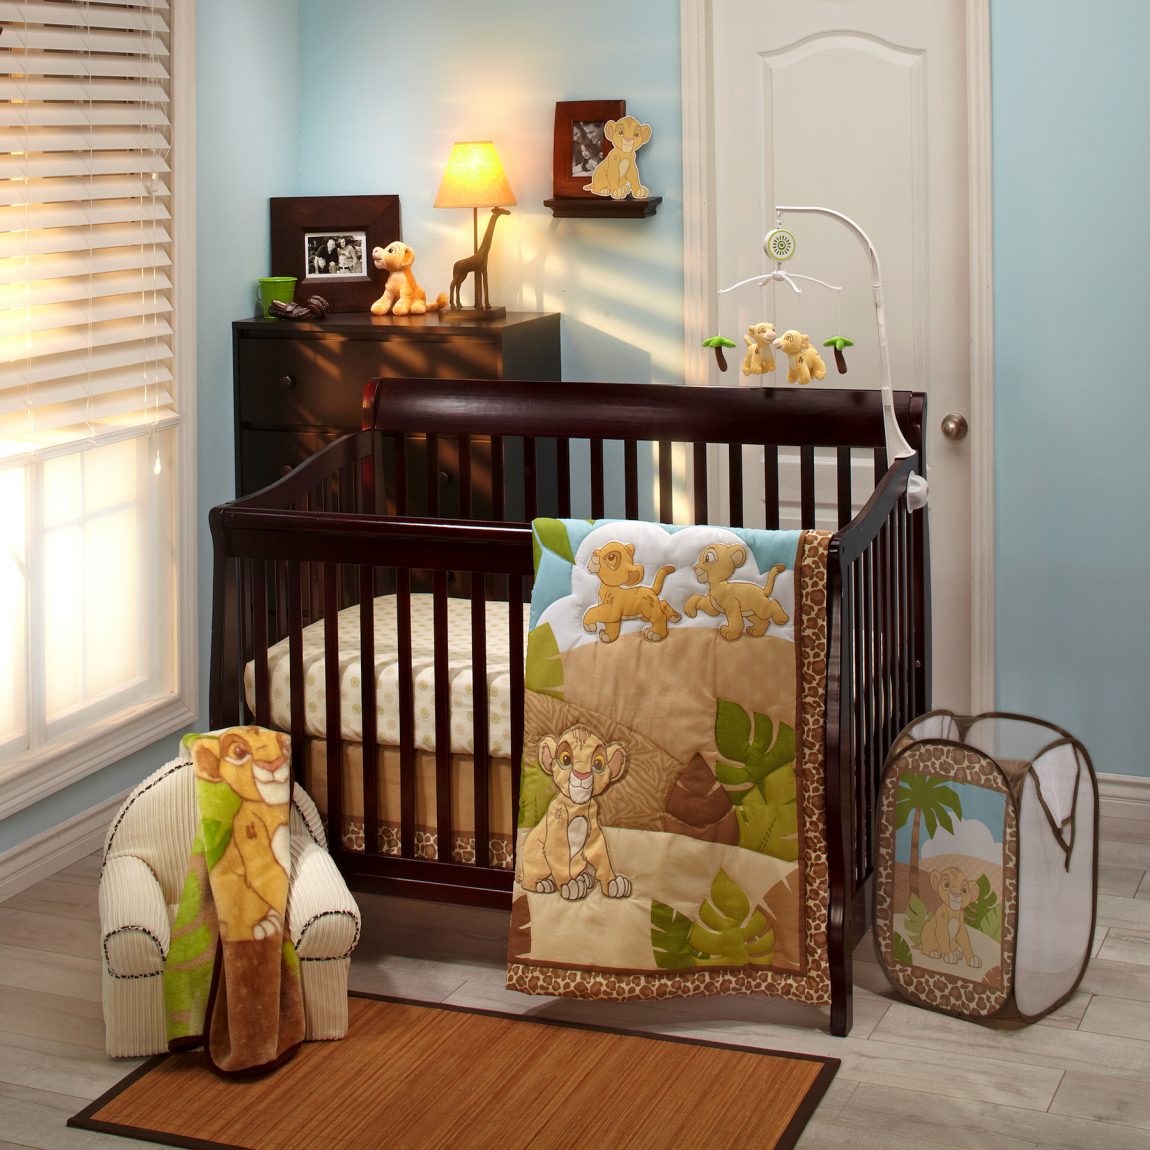 Lion King Nursery Legendary Lion King Themed Baby Nursery For Boy Furnished With Dark Brown Wooden Mini Crib Bedding Dream Homes Astonishing Mini Crib Bedding Designed In Minimalist Model For Mansion